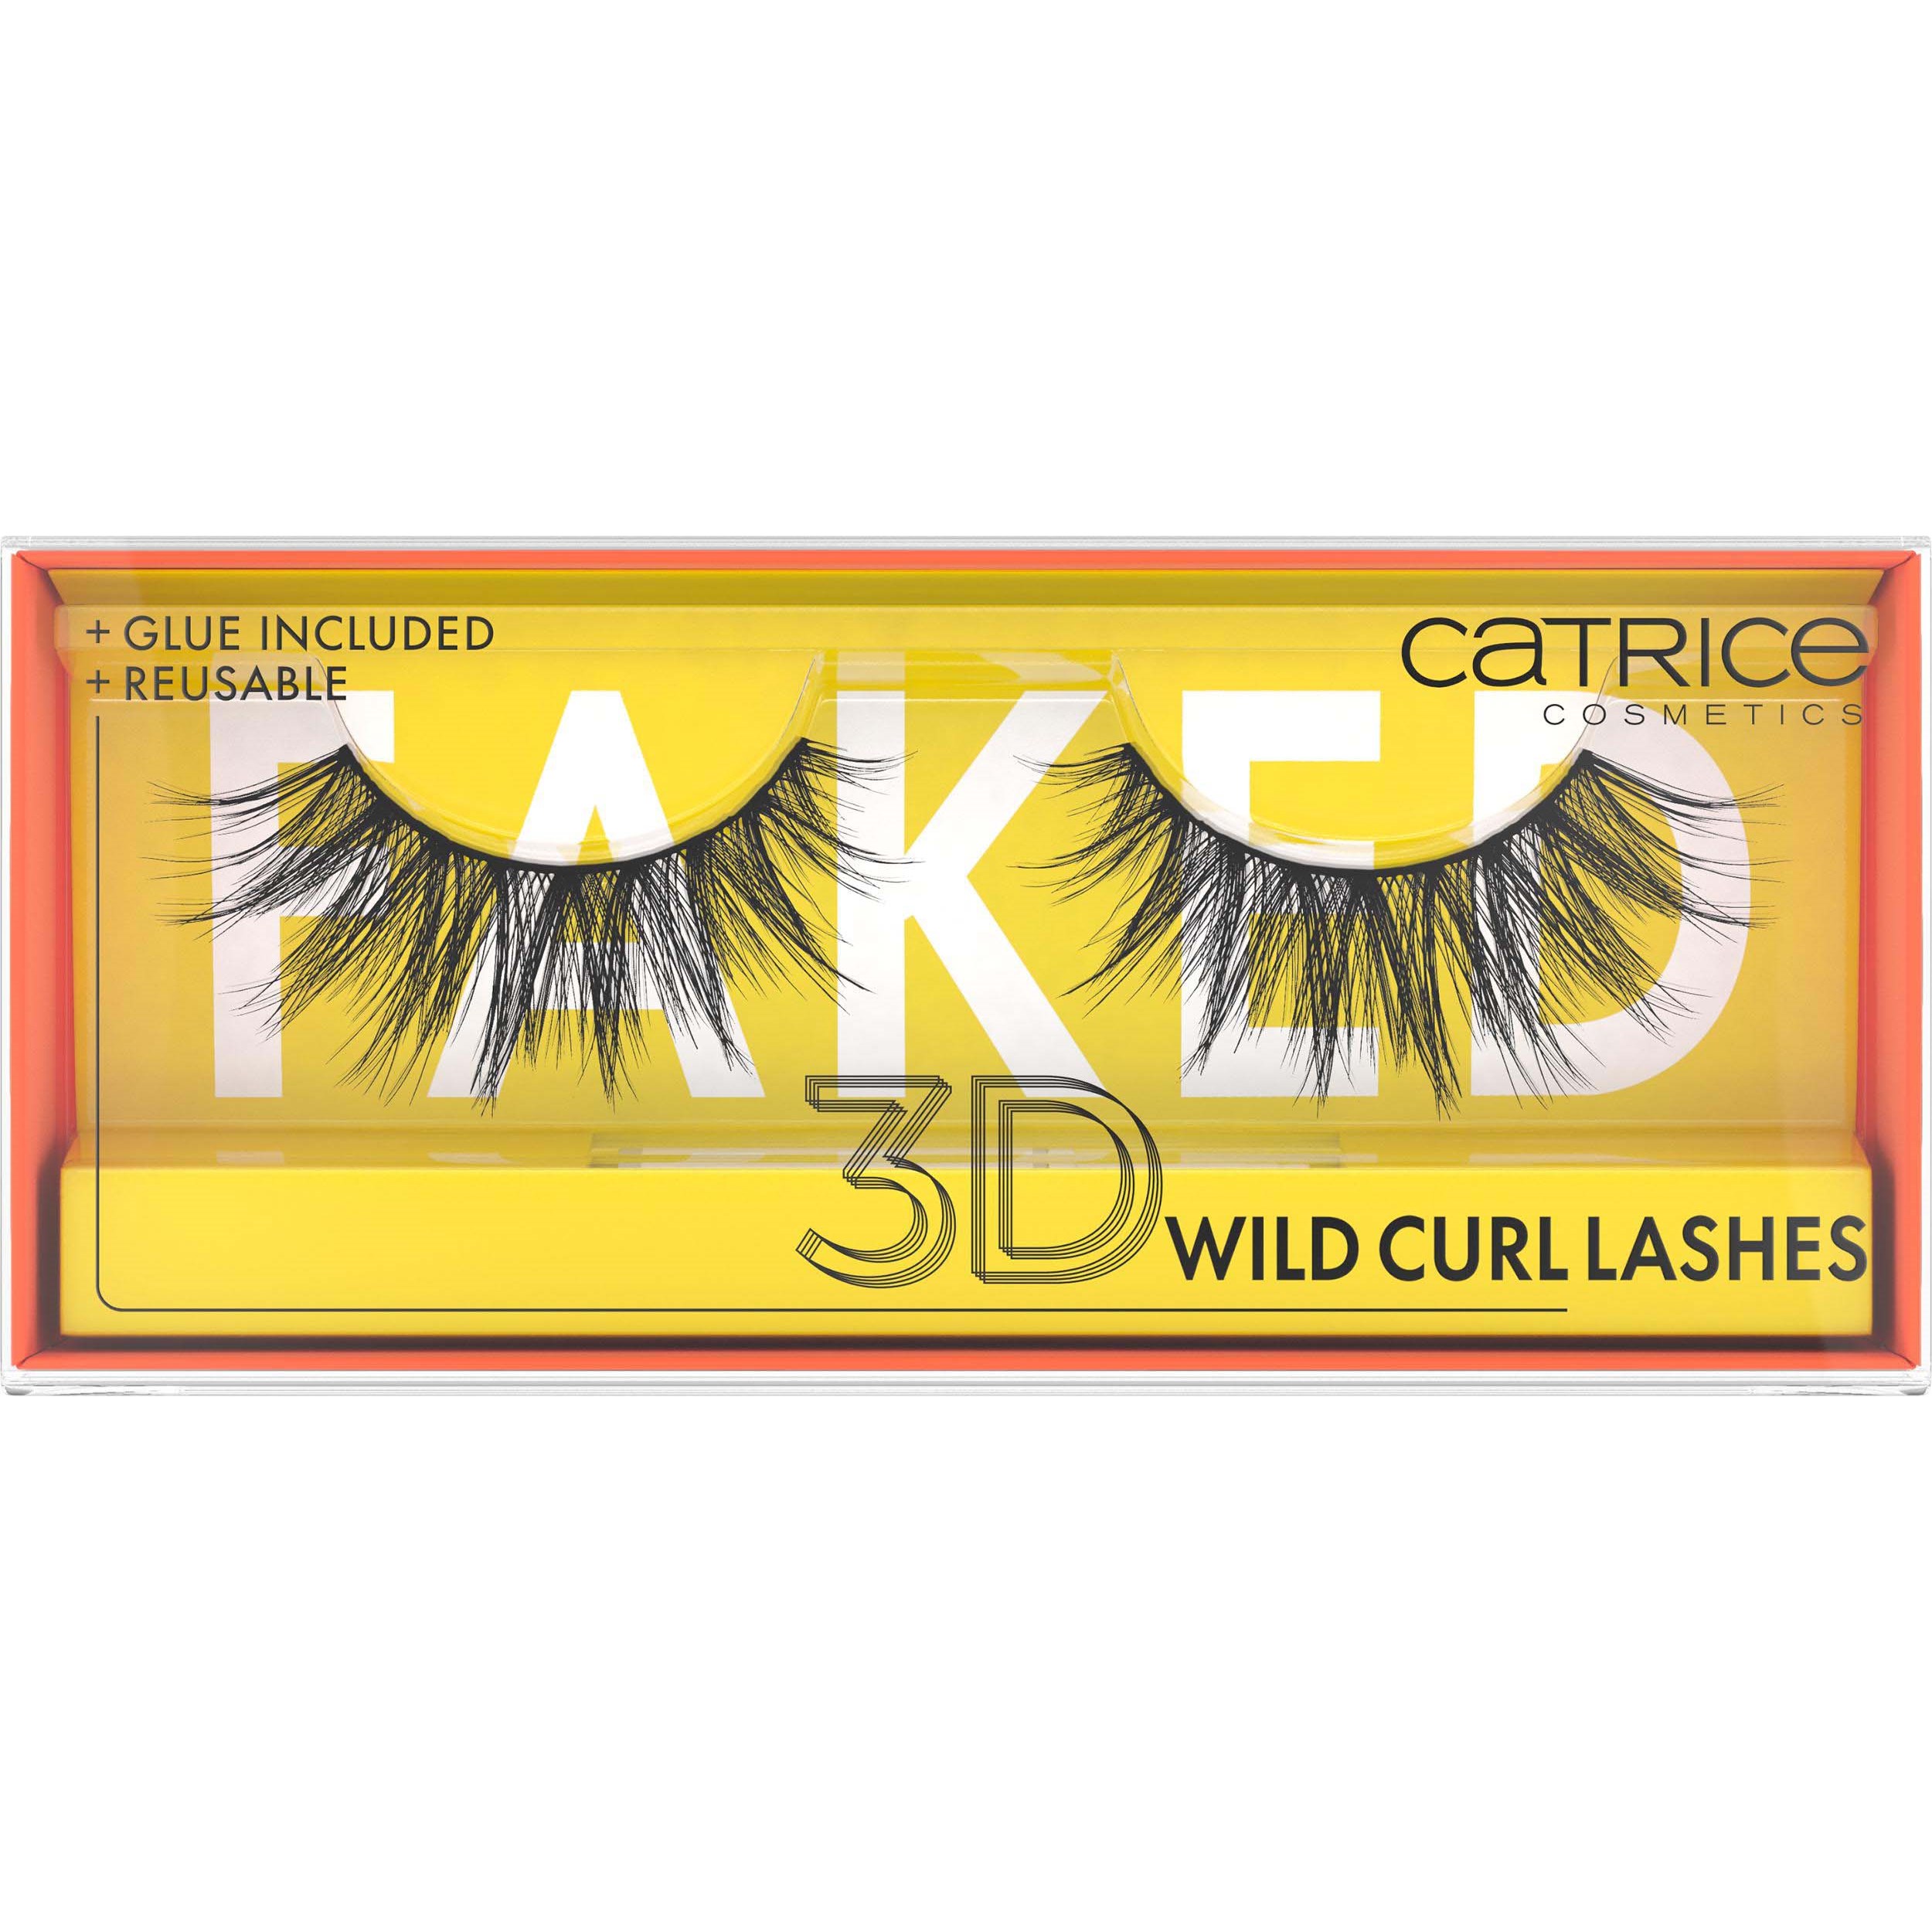 Läs mer om Catrice Faked 3D Wild Curl Lashes